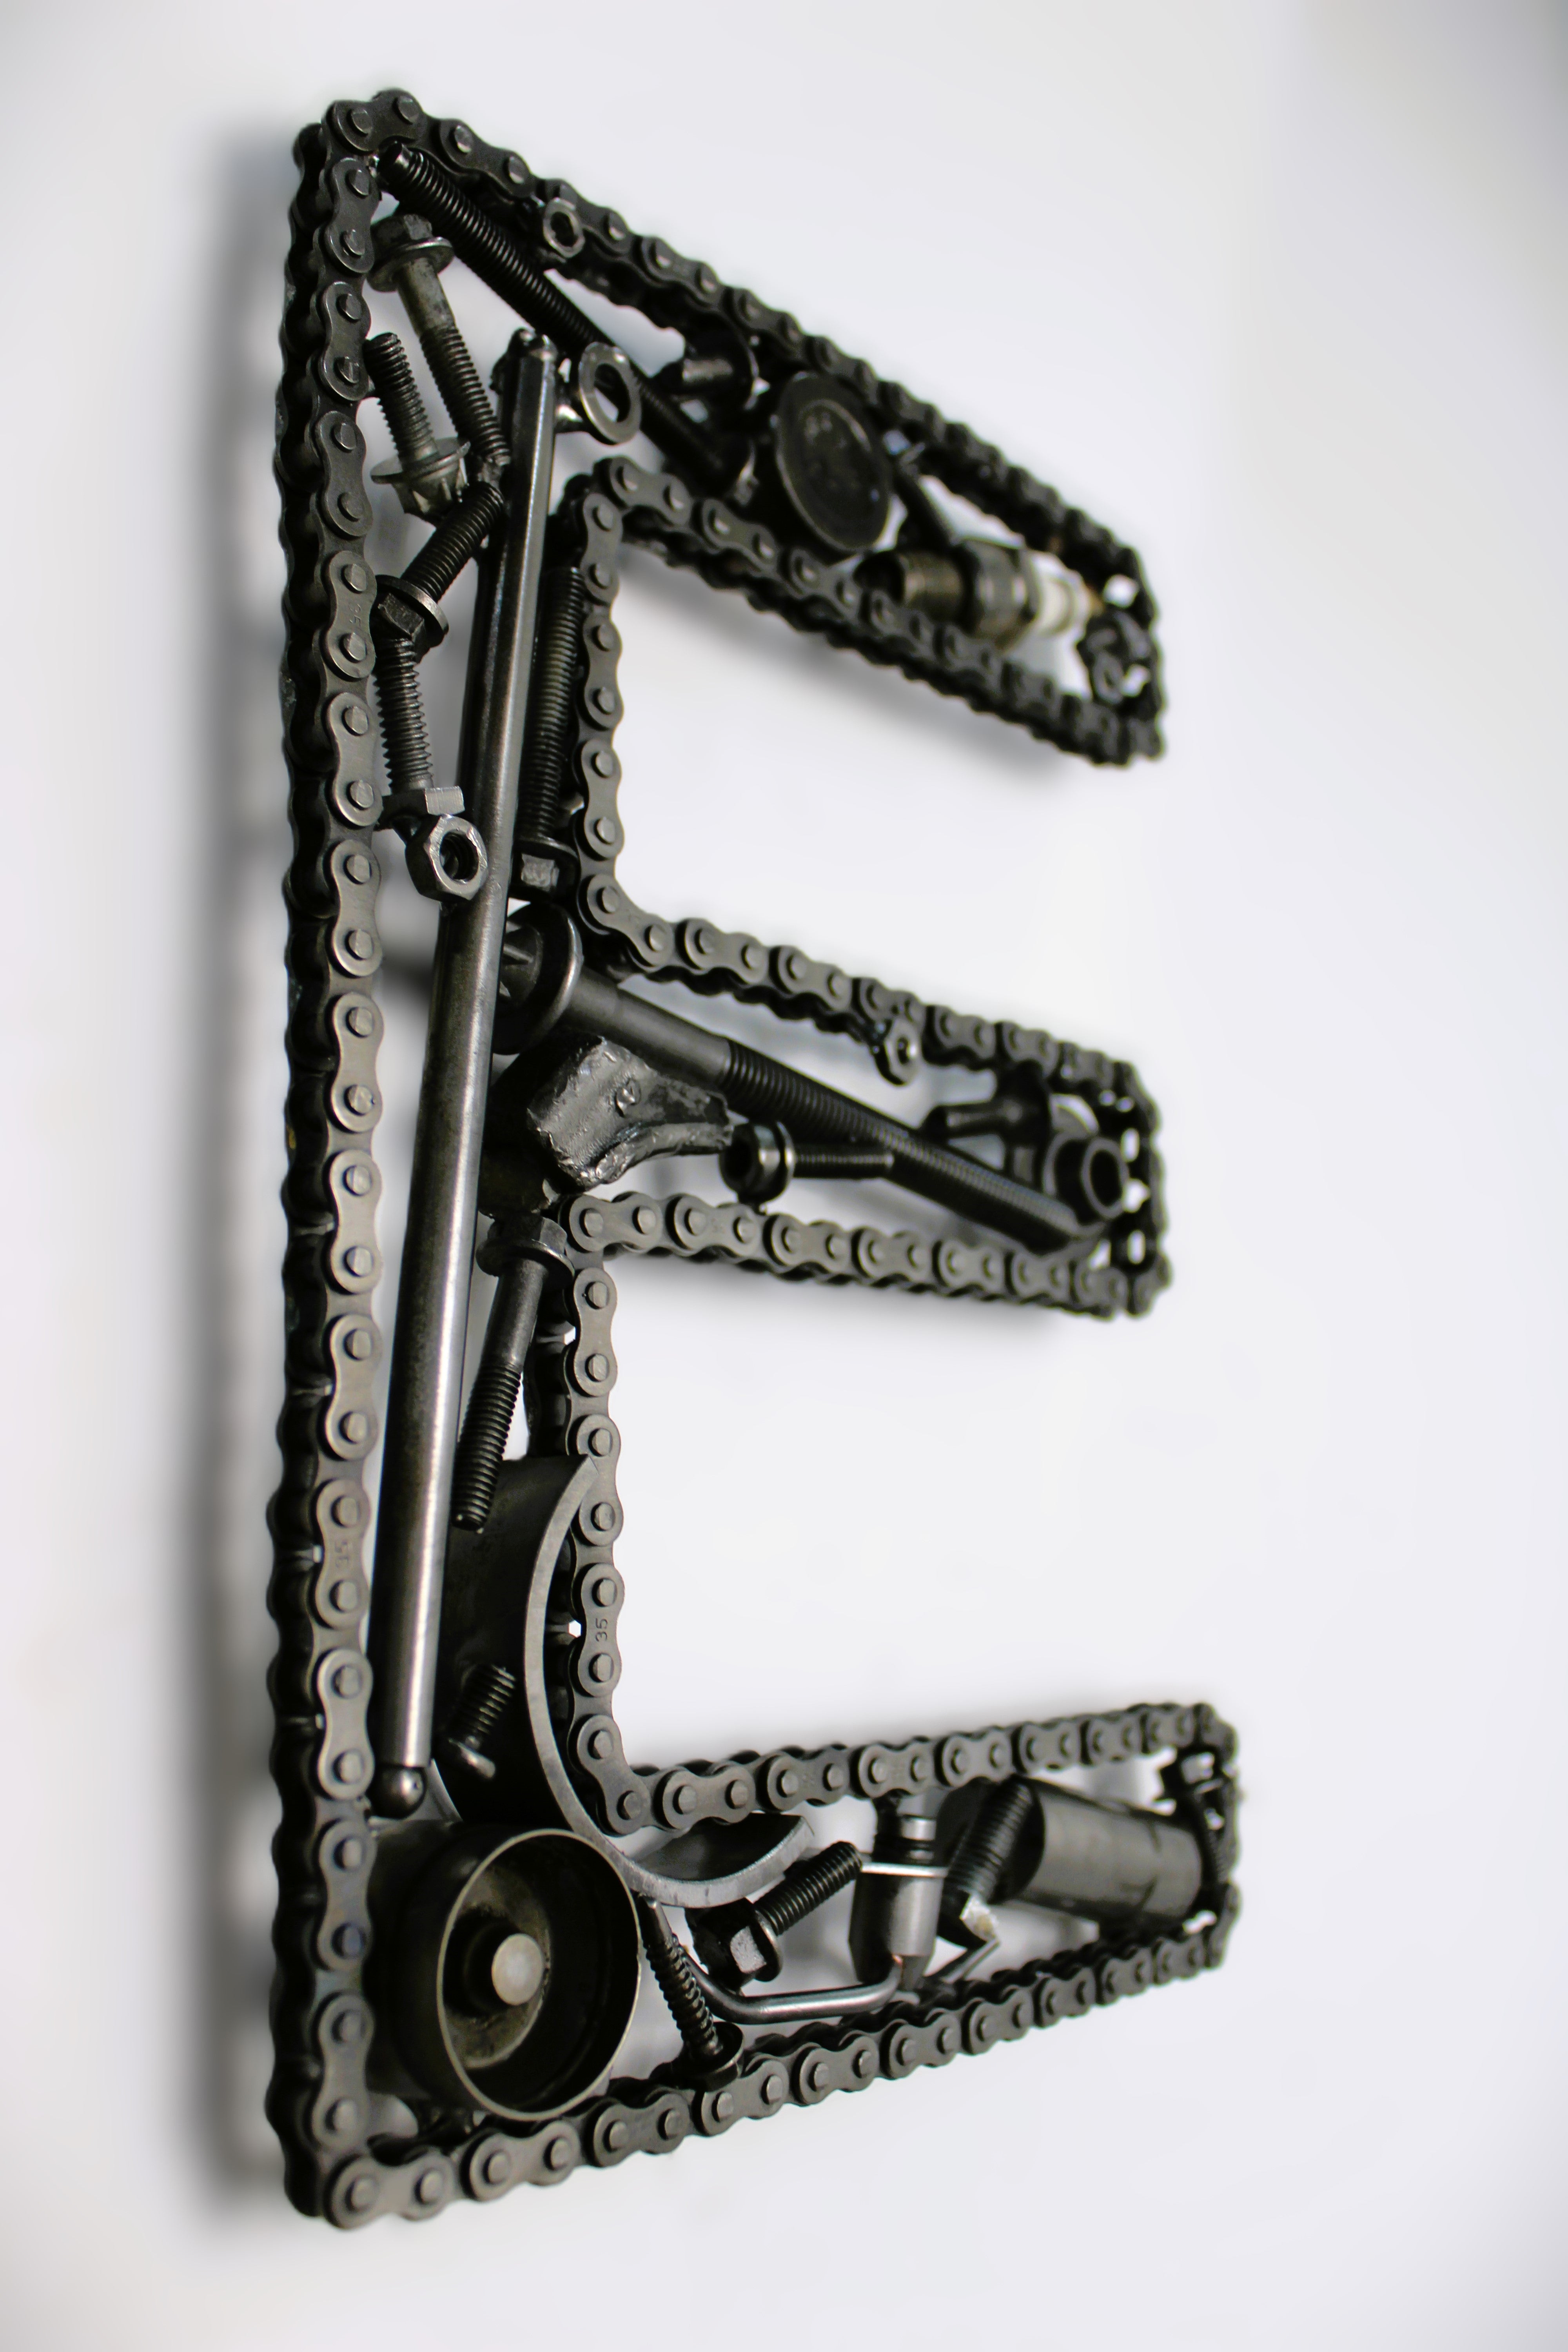 A letter E made out of real car parts, outlined with a timing chain.